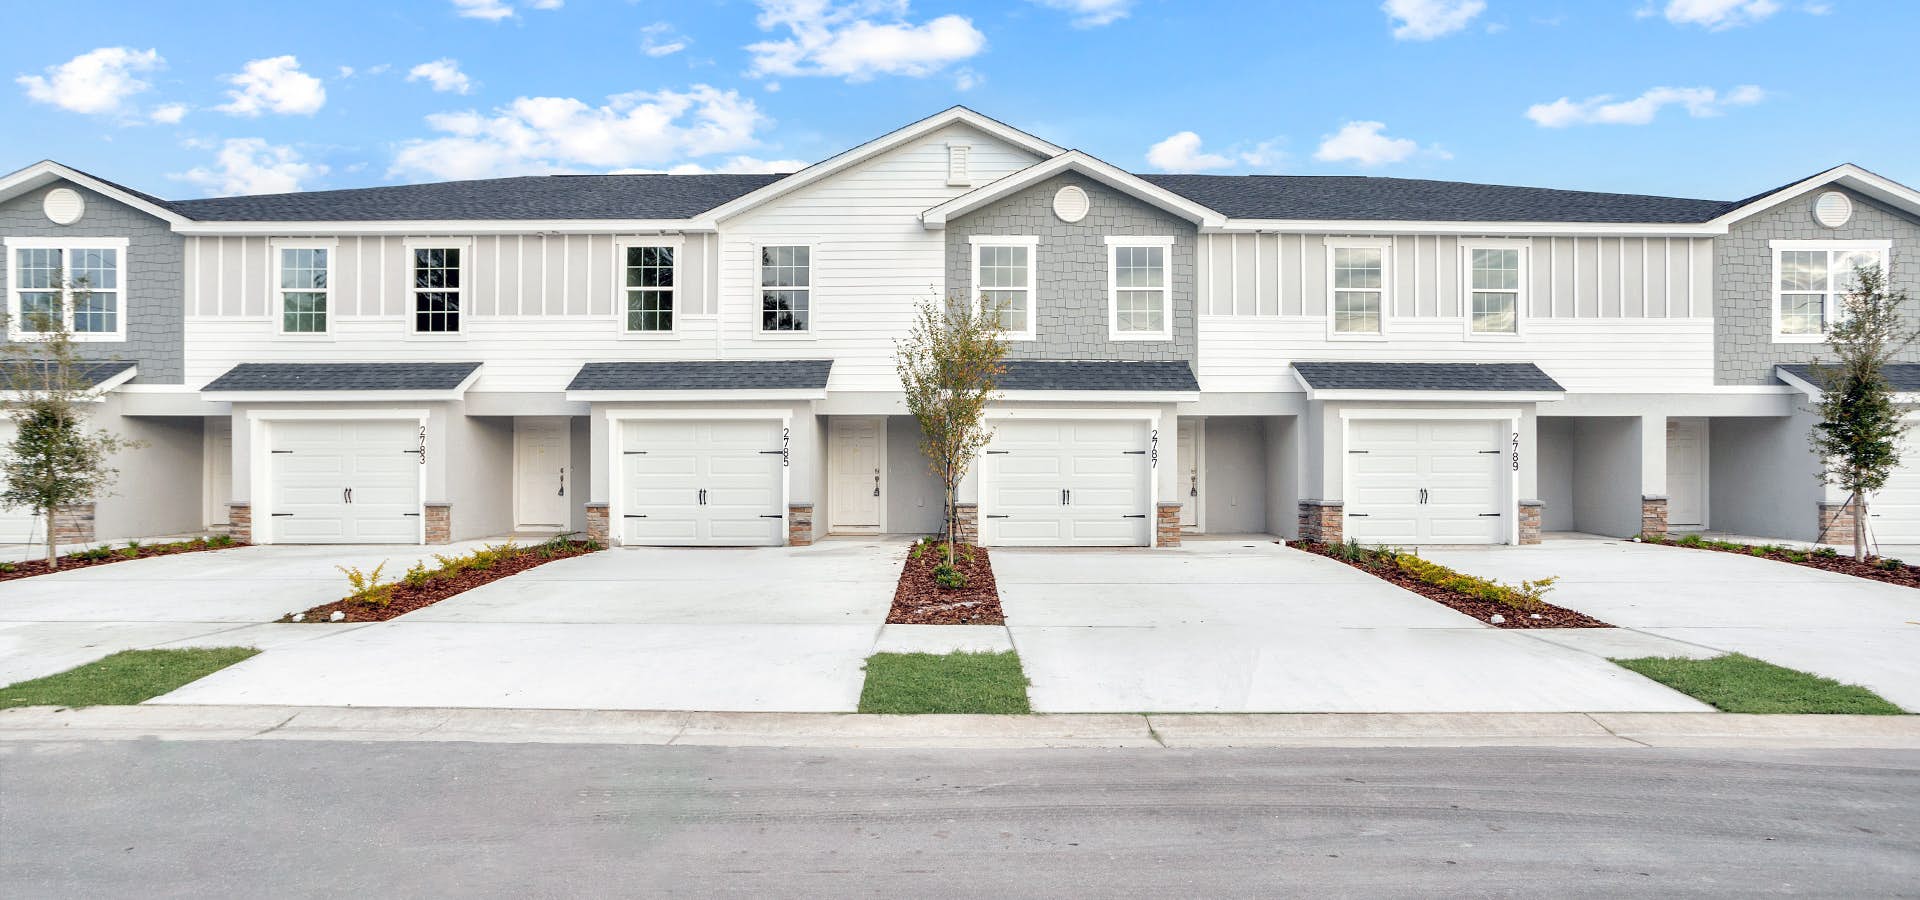 Townhomes in Plant City, FL with stone and trim details and 2-car driveway